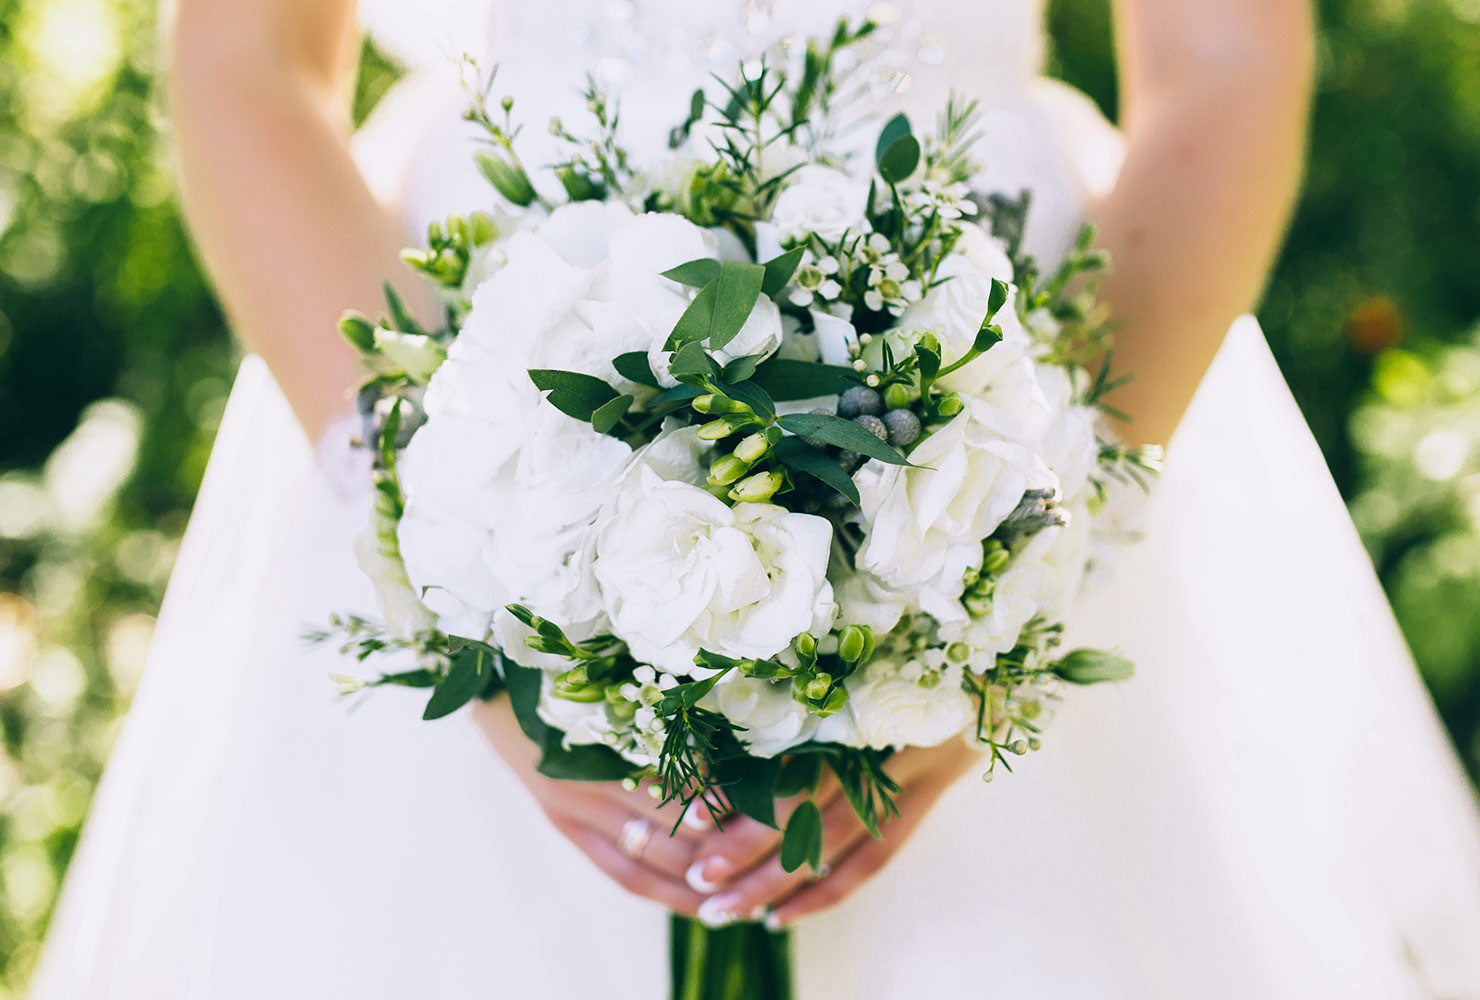 Pictures Of Wedding Flowers
 The 15 Most Popular Wedding Flowers In 2019